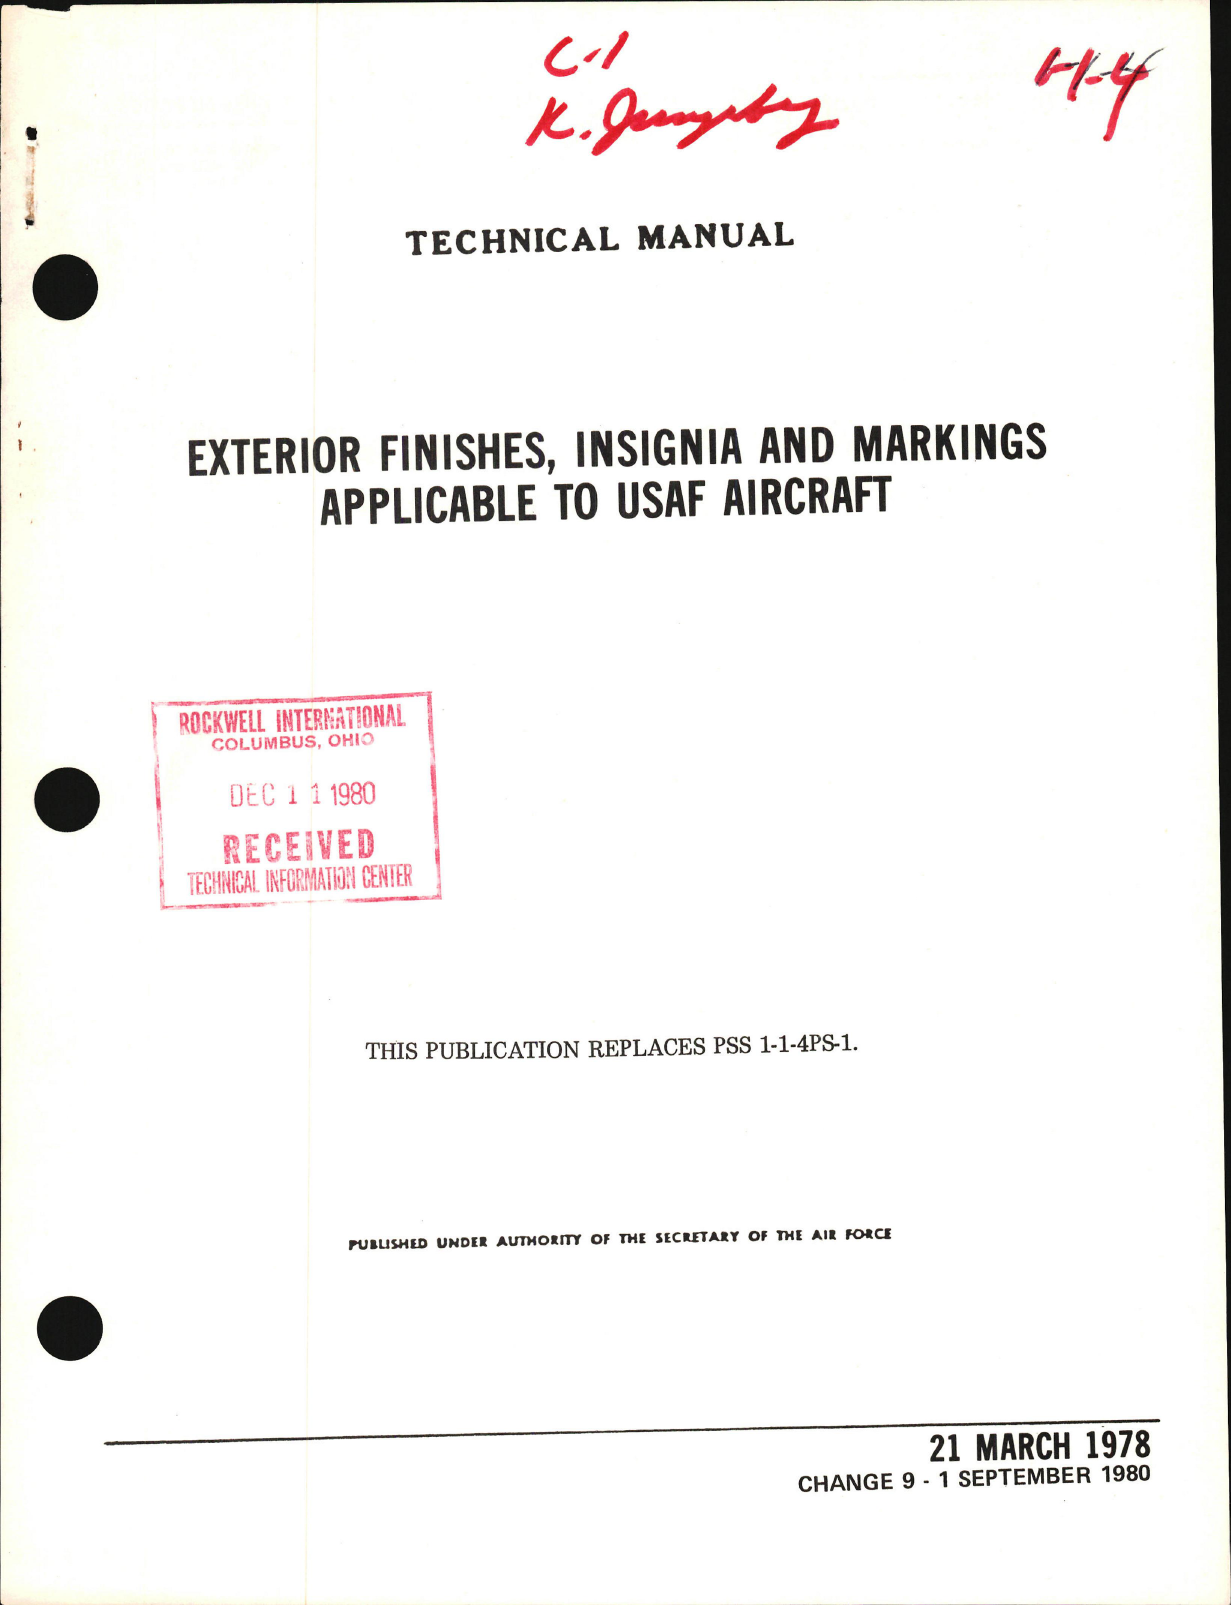 Sample page 1 from AirCorps Library document: Exterior Finishes, Insignia and Markings for USAF Aircraft - Change - 9